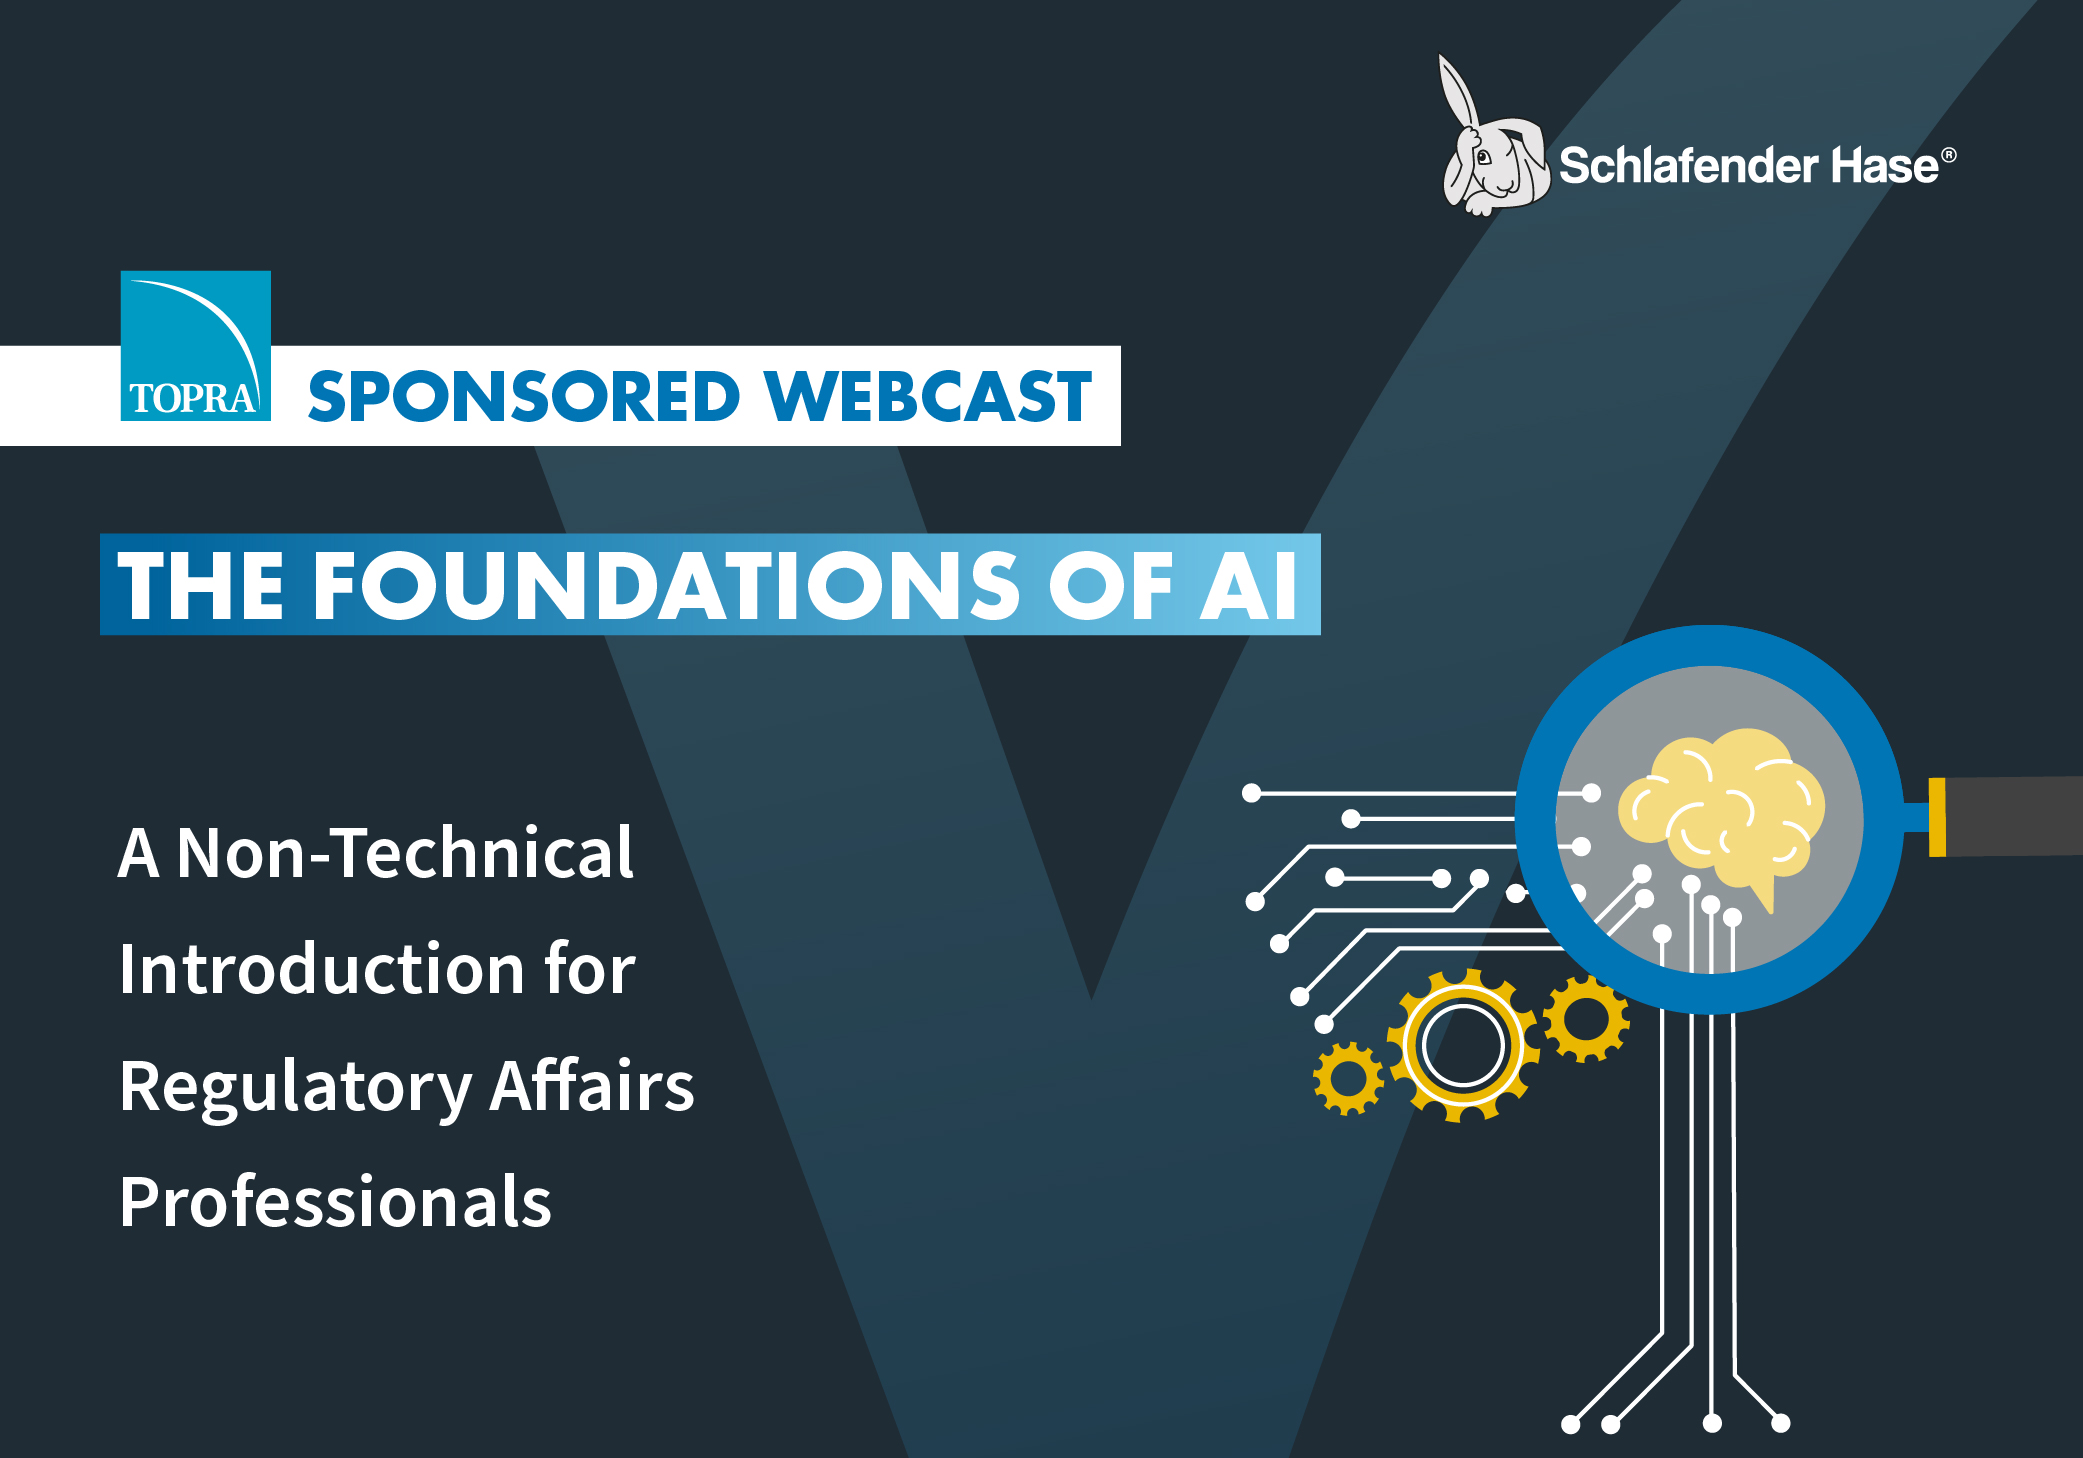 TOPRA Sponsored Webcast: A Non-Technical AI Introduction for Regulatory Affairs Professionals